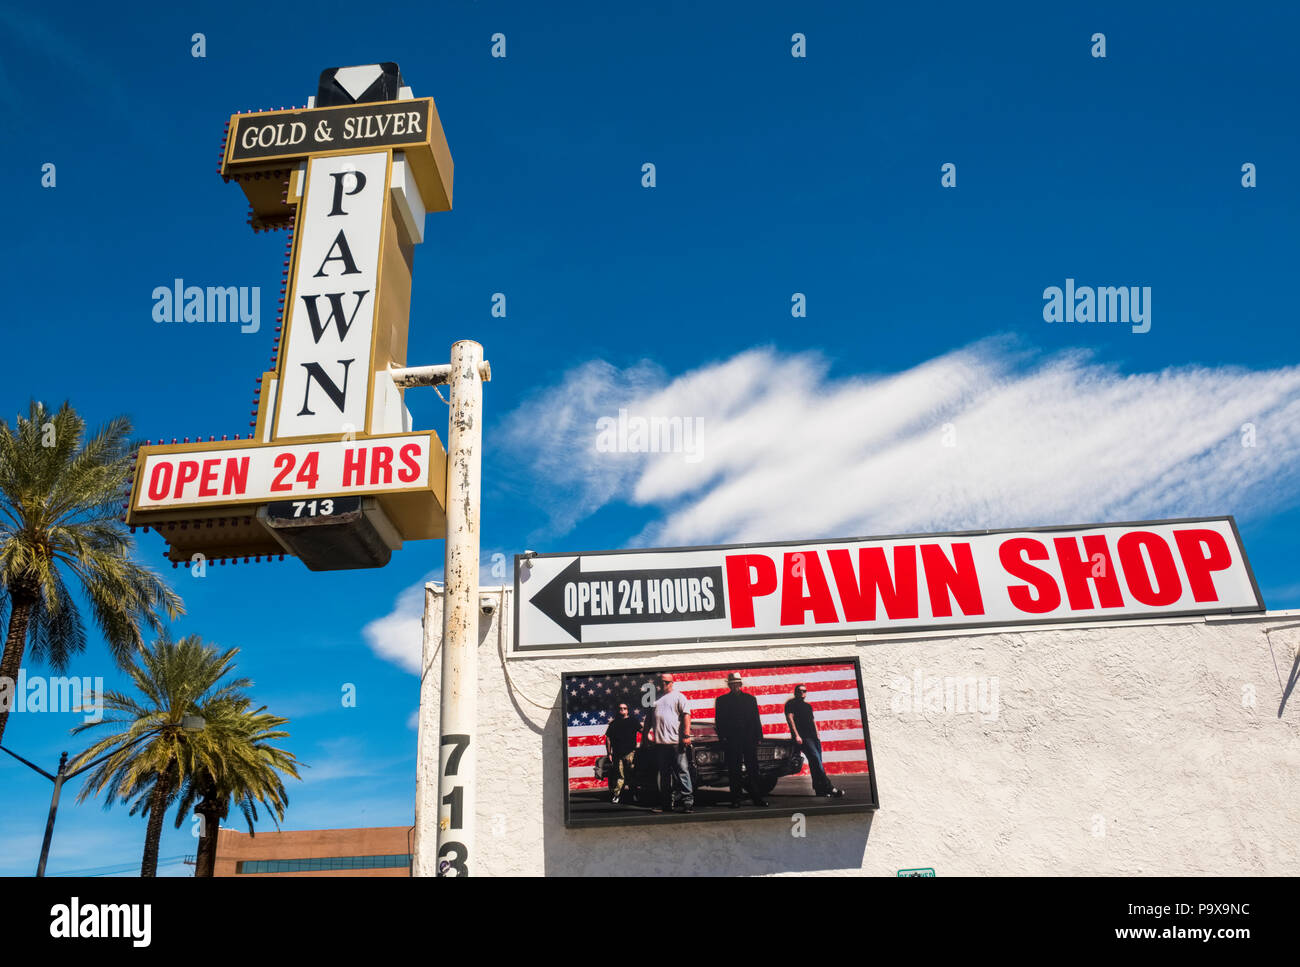 The Gold and Silver Pawn Shop of TV's Pawn Stars fame in Las Vegas, Nevada, USA Stock Photo